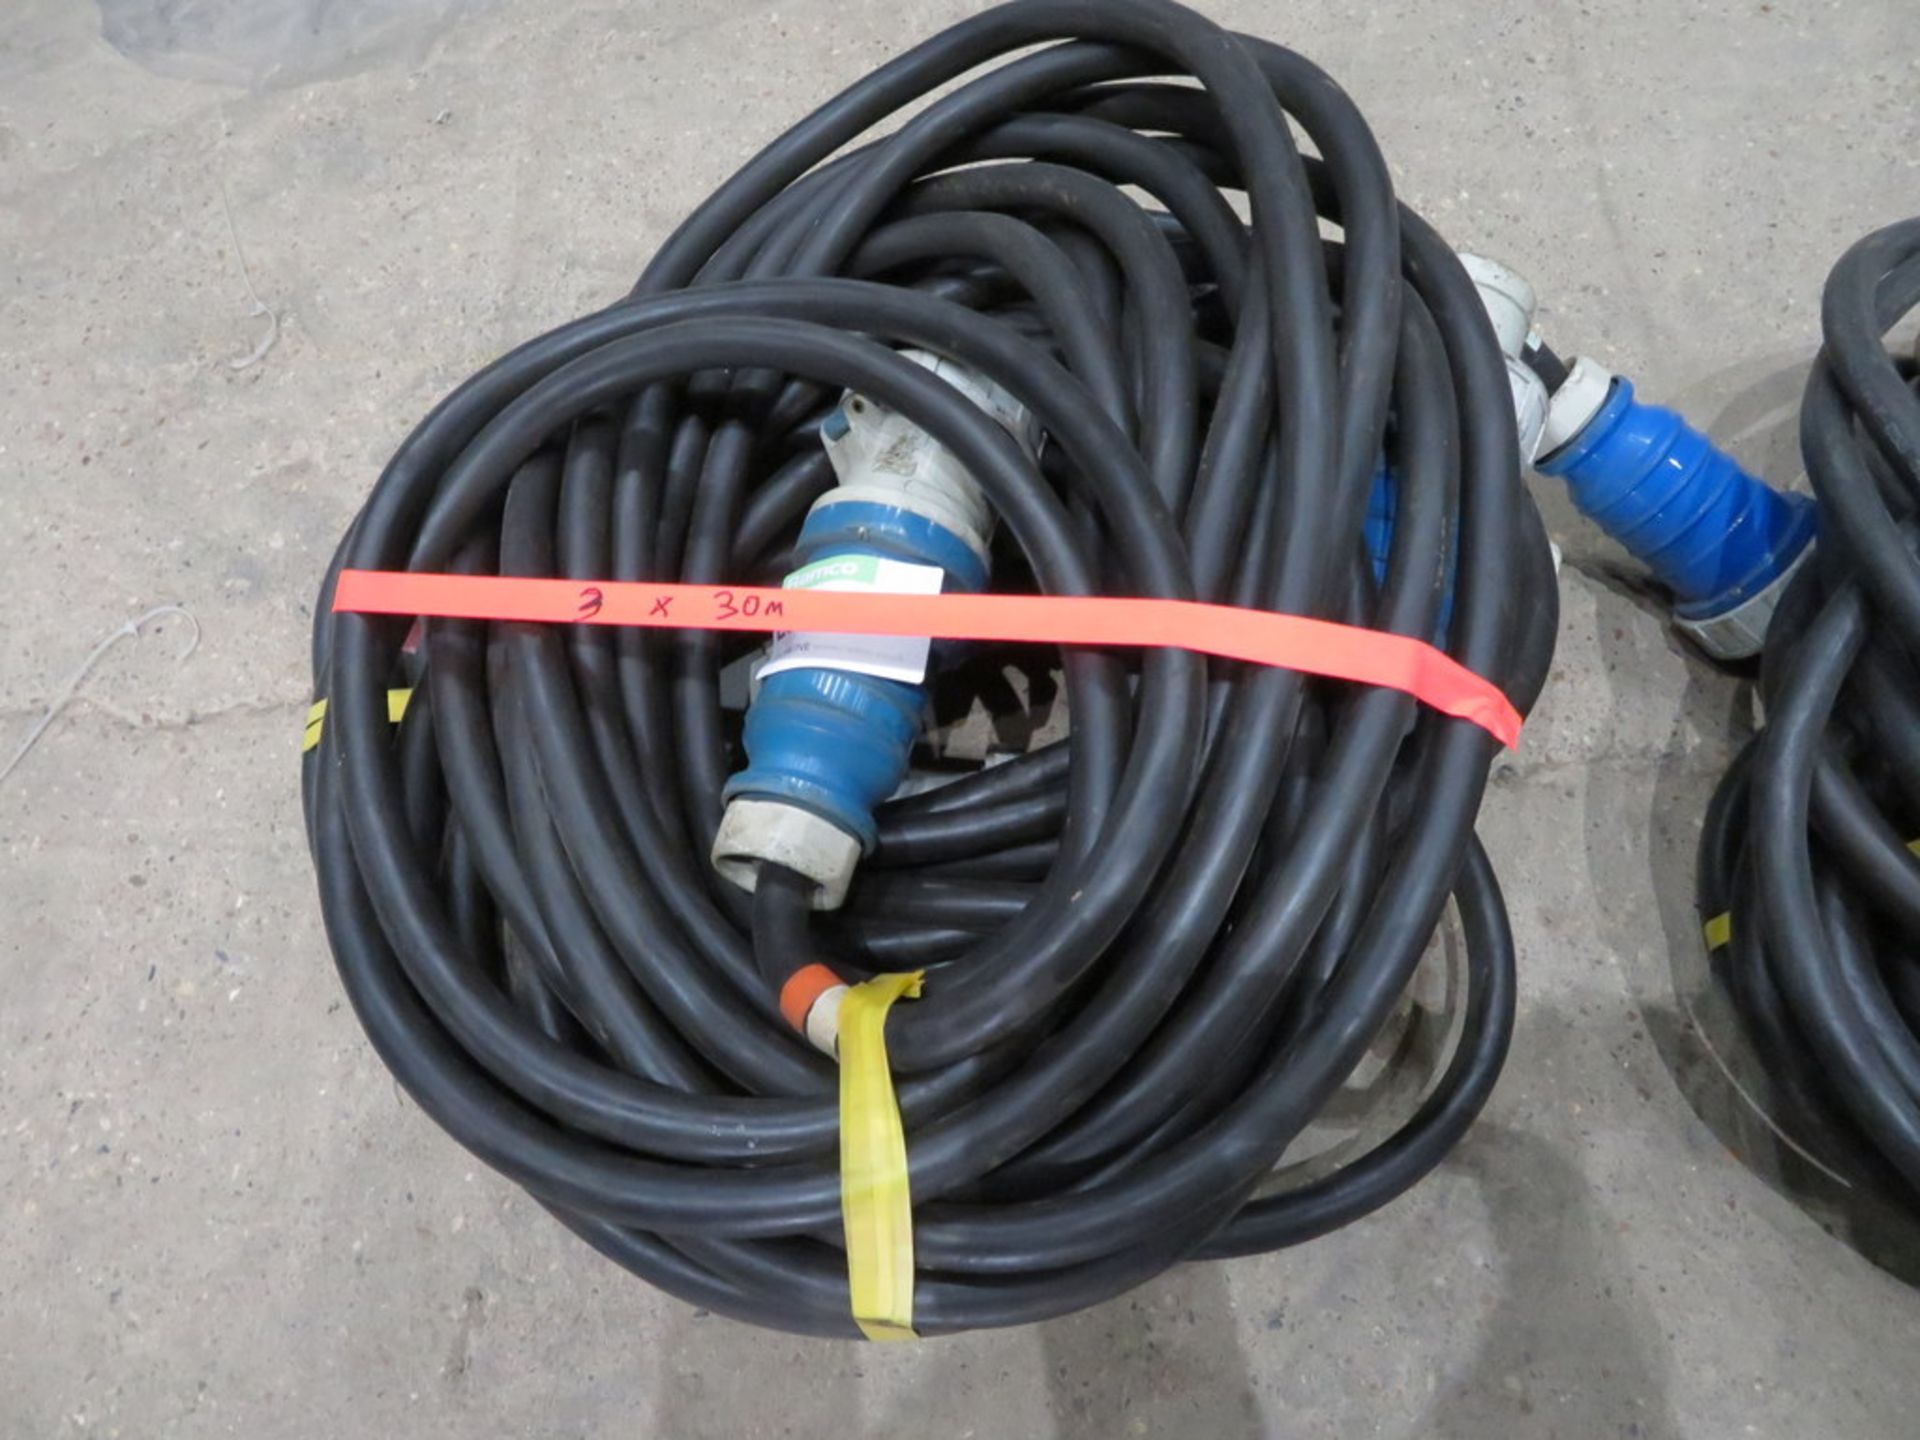 3x 30m 125A single phase cable